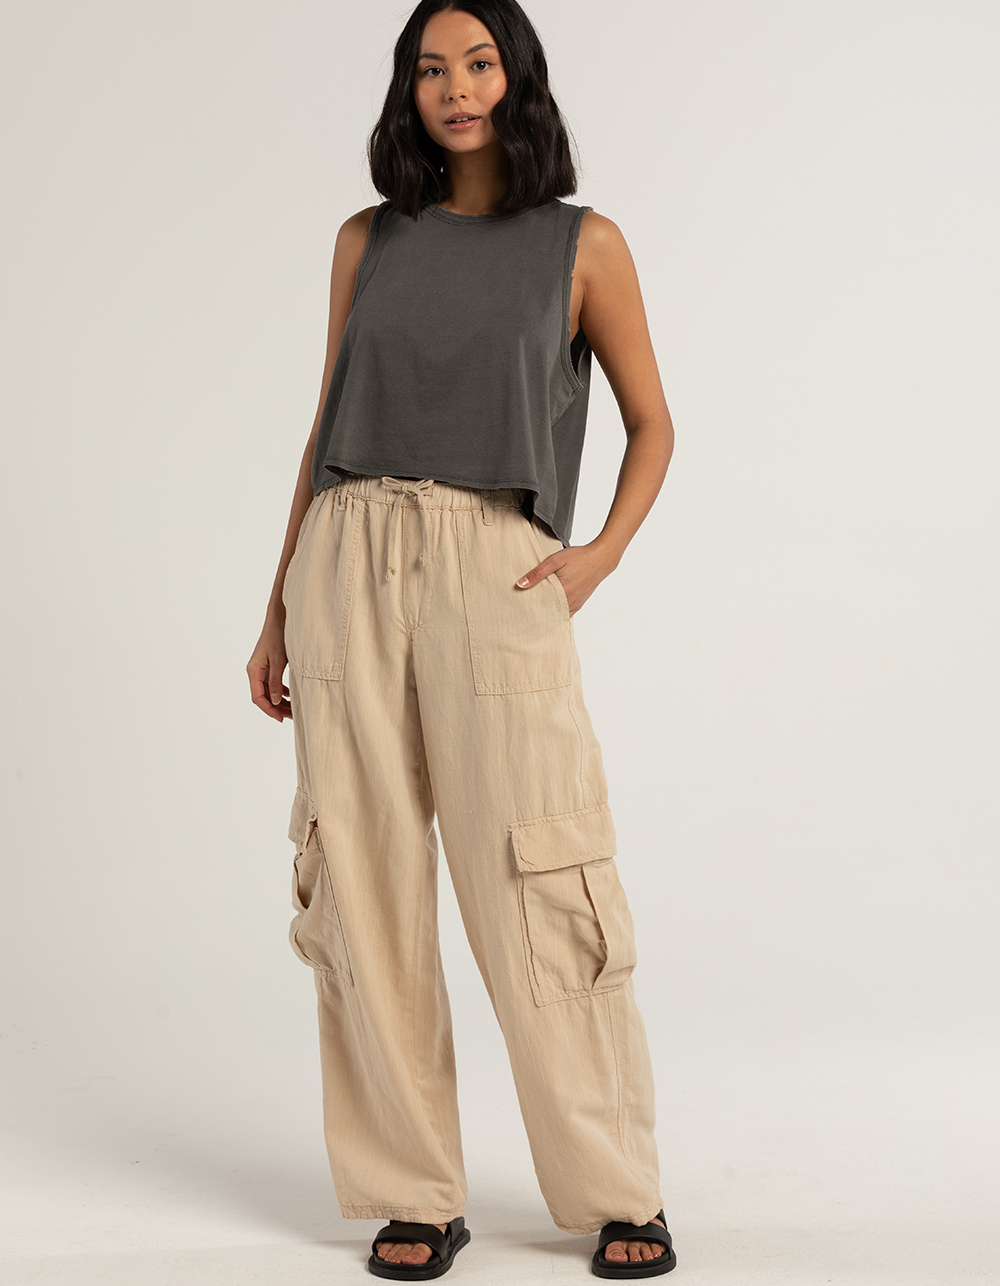 Bdg Urban Outfitters Luca Cotton & Linen Cargo Pants in Chocolate